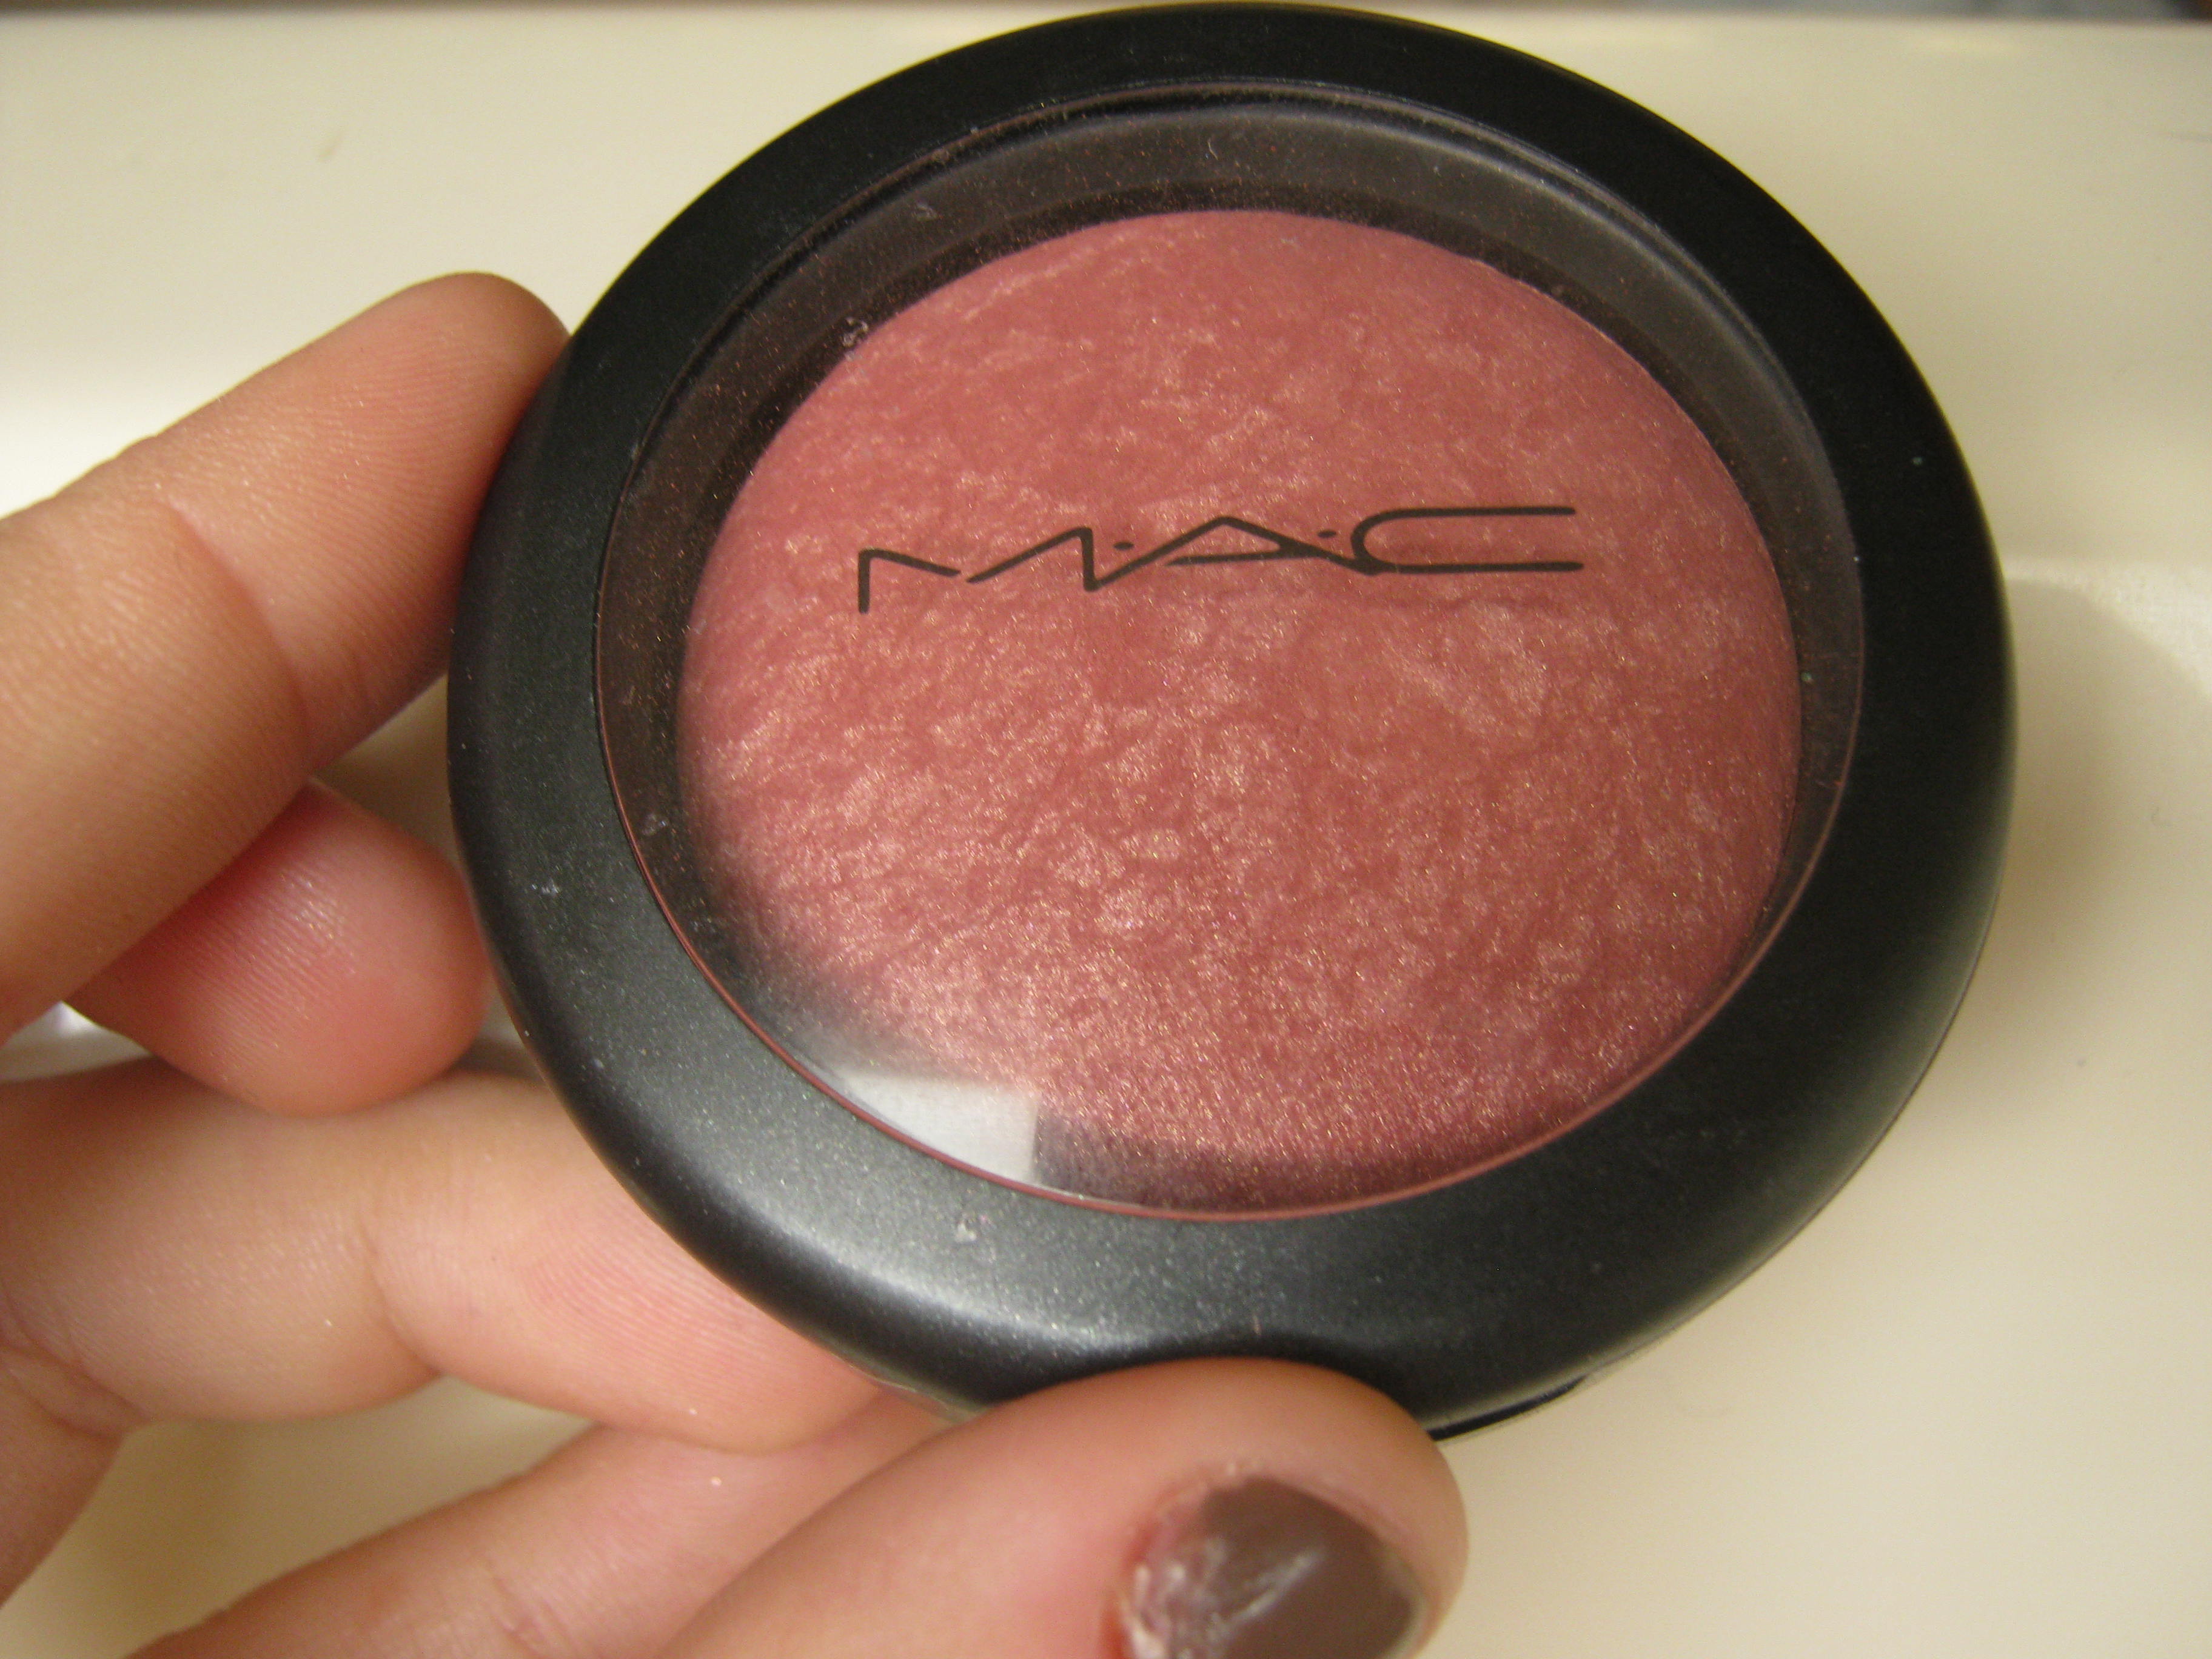 Today, I’m digging up another lovely piece from my stash, MAC Mineralize bl...